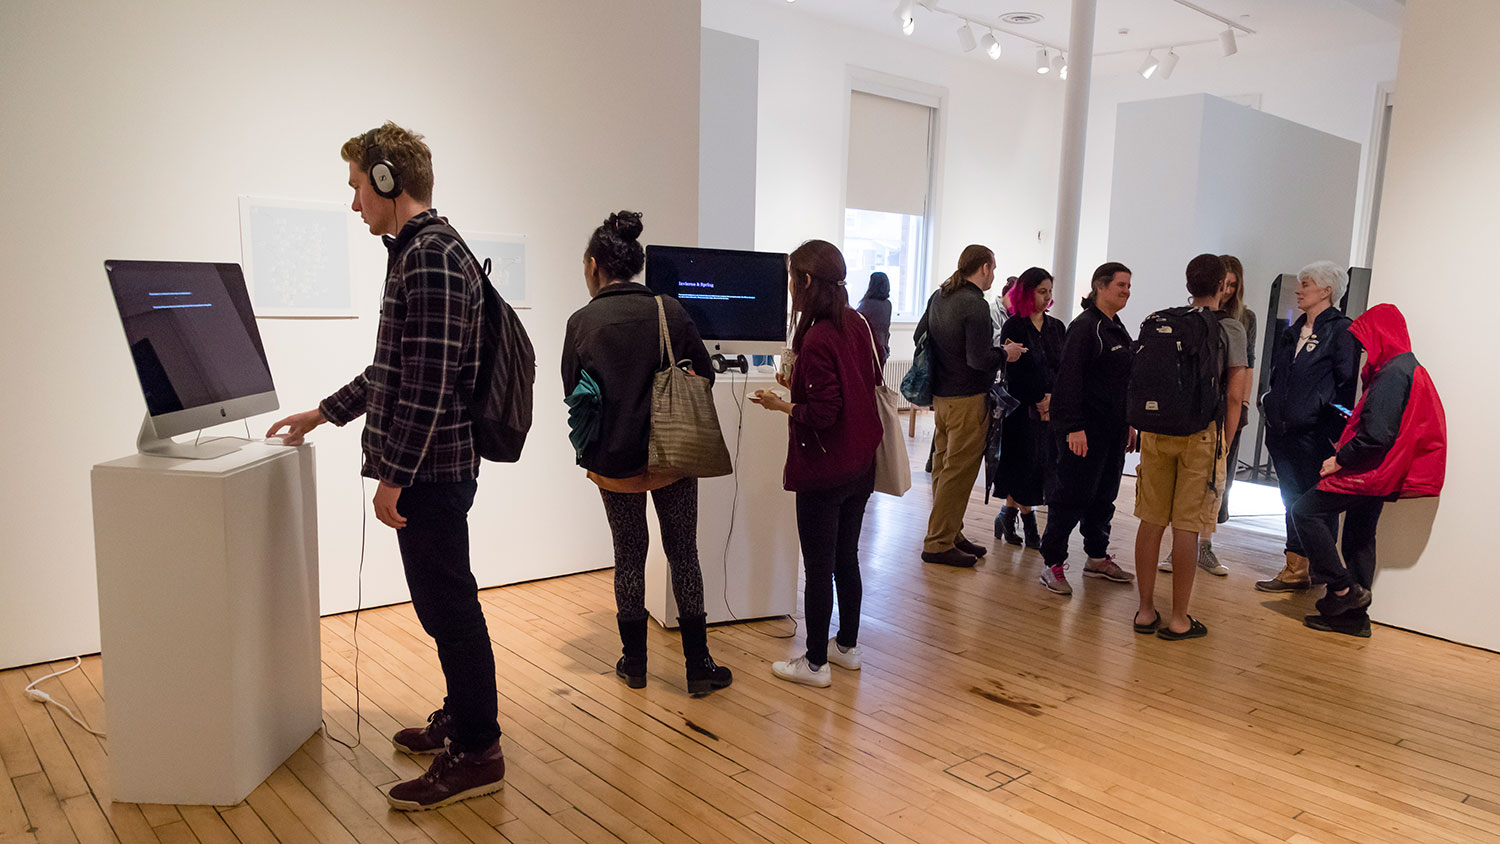 Gallery goers mingle around pedestals with TVs set up on top